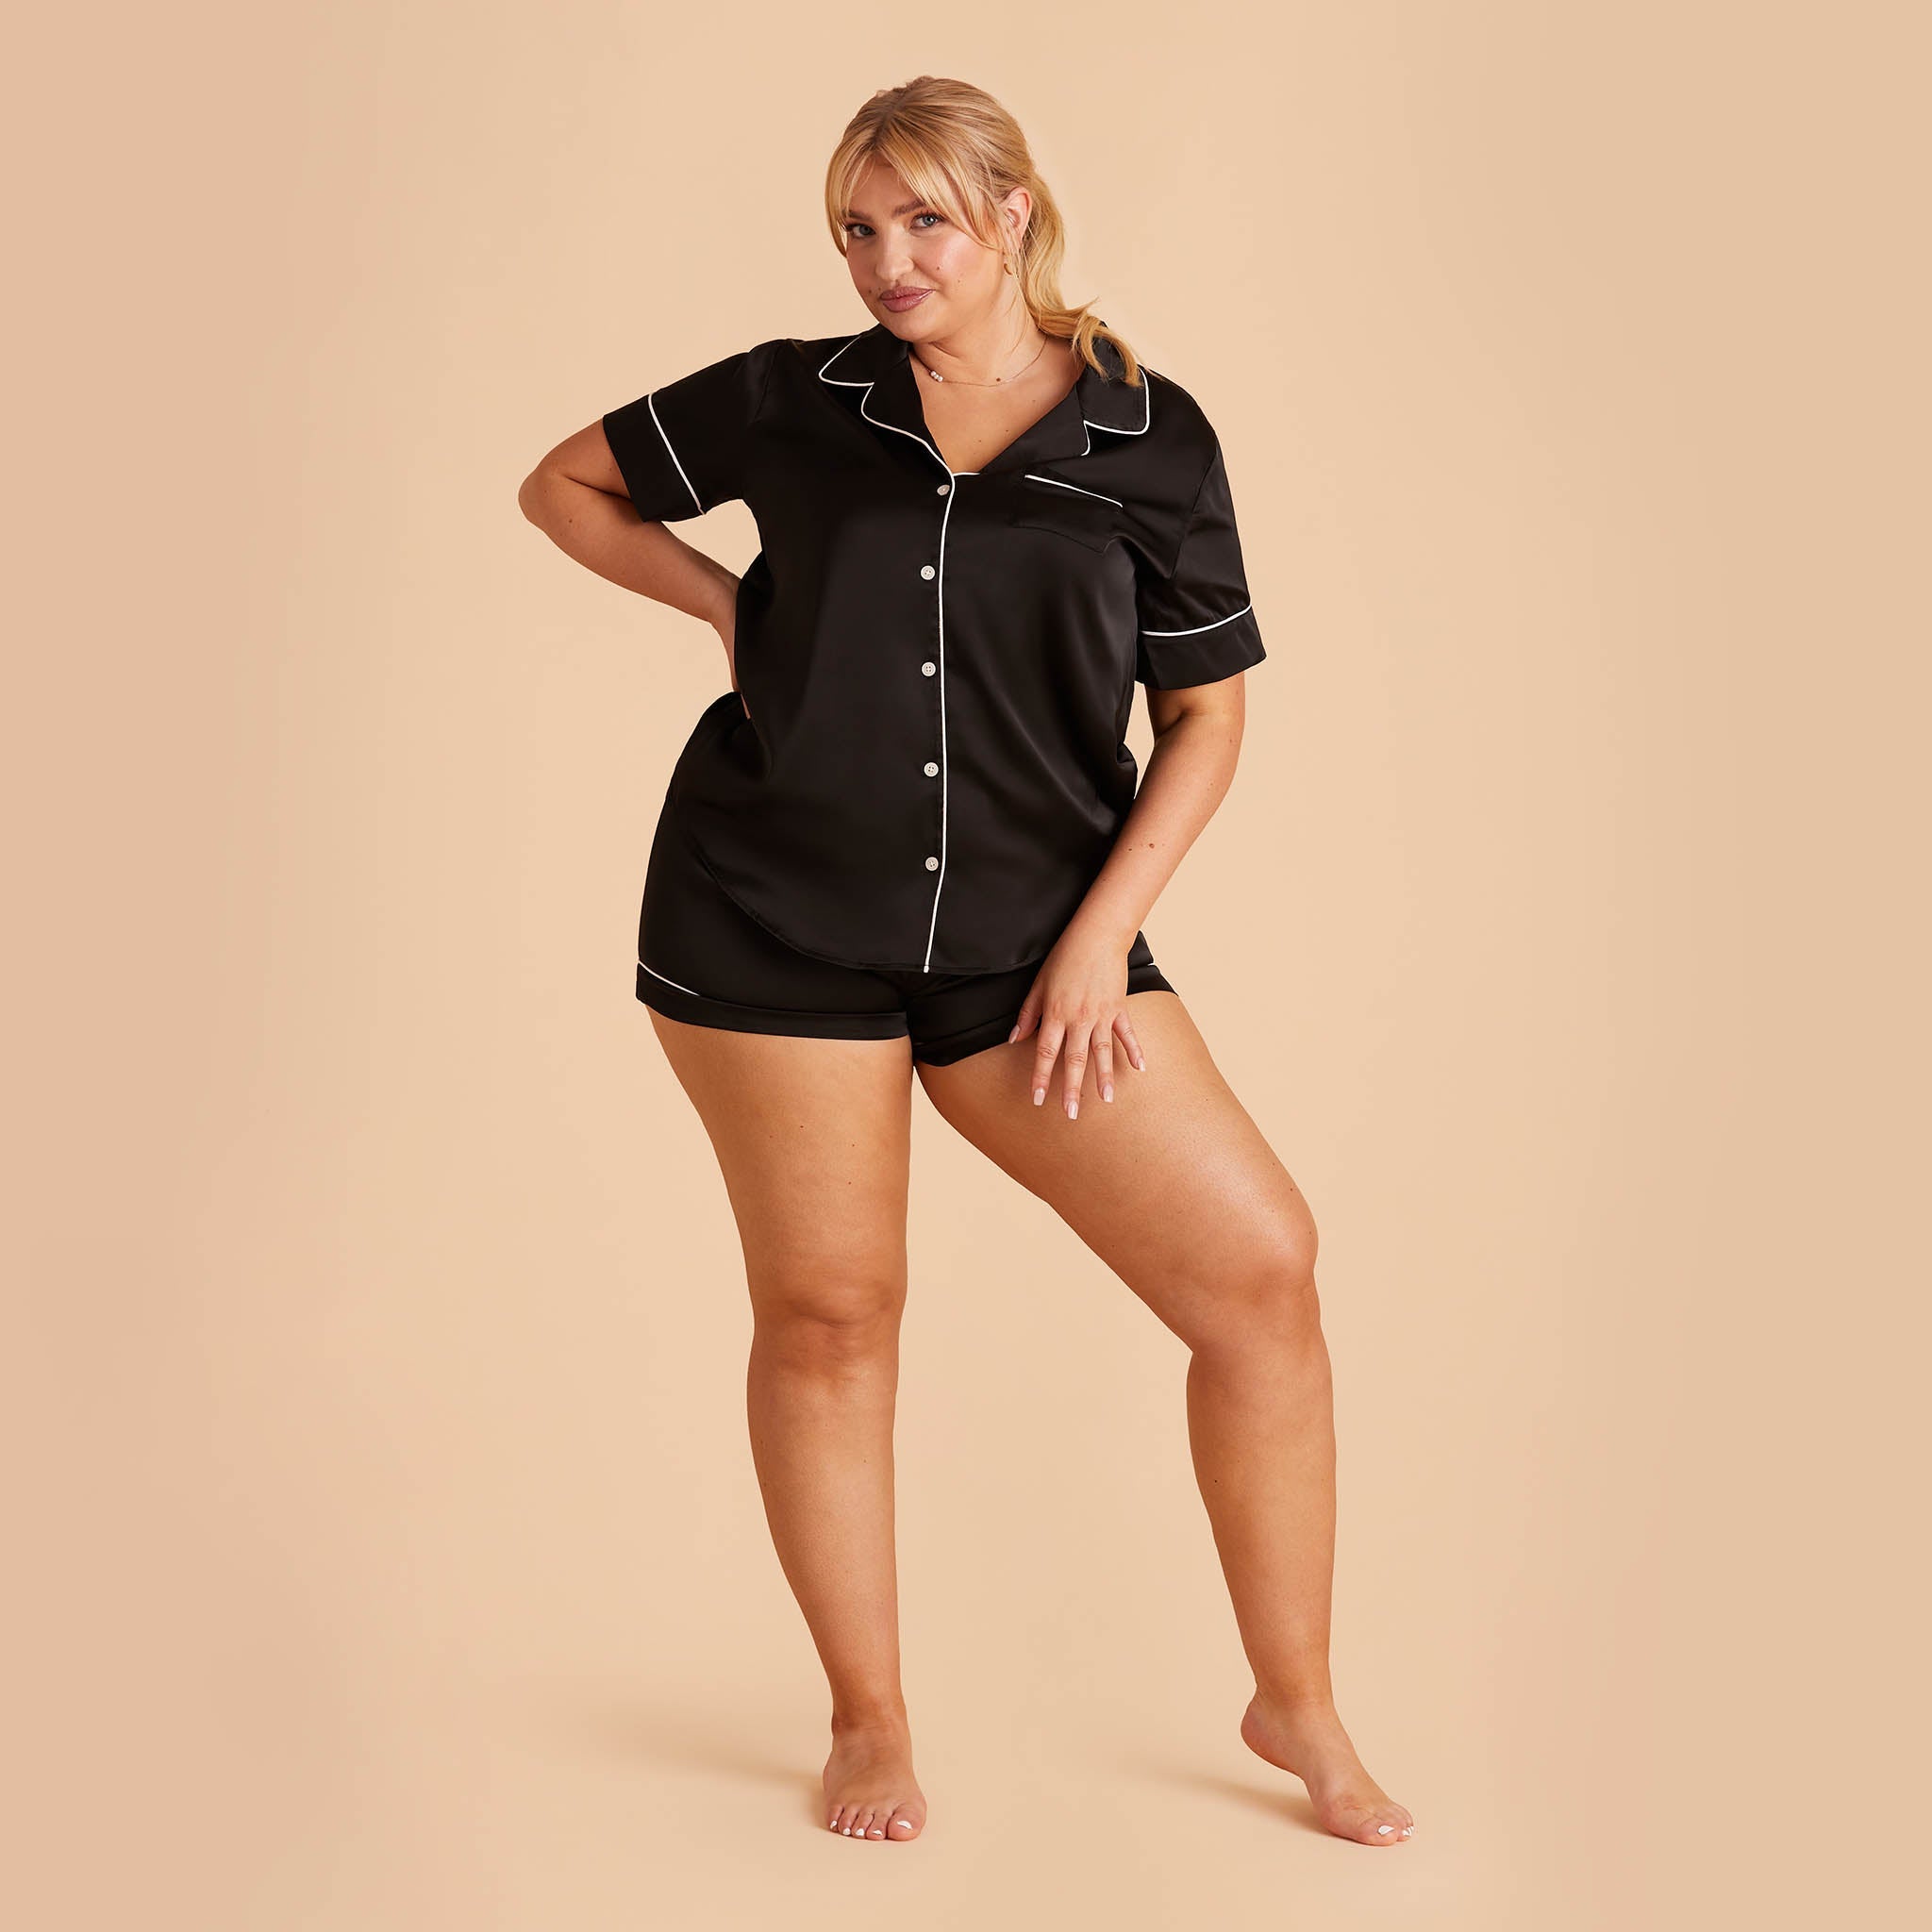 Jonny Satin Short Sleeve Bridesmaid Pajamas With White Piping in black, front view